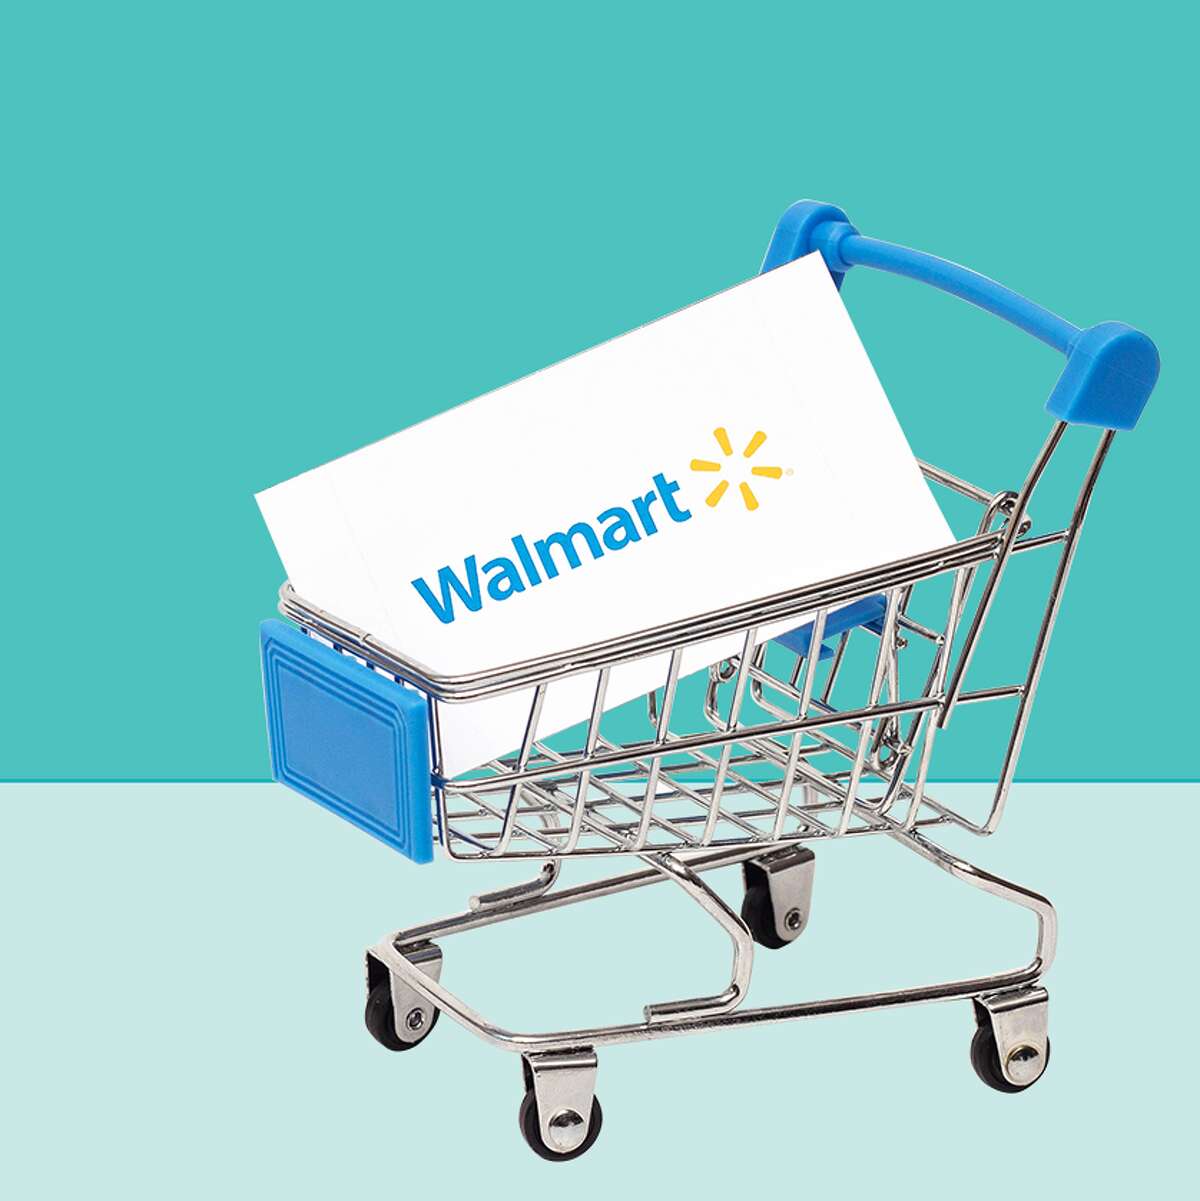 Walmart Plus officially launches on 9/15 with a 15 day free trial period.